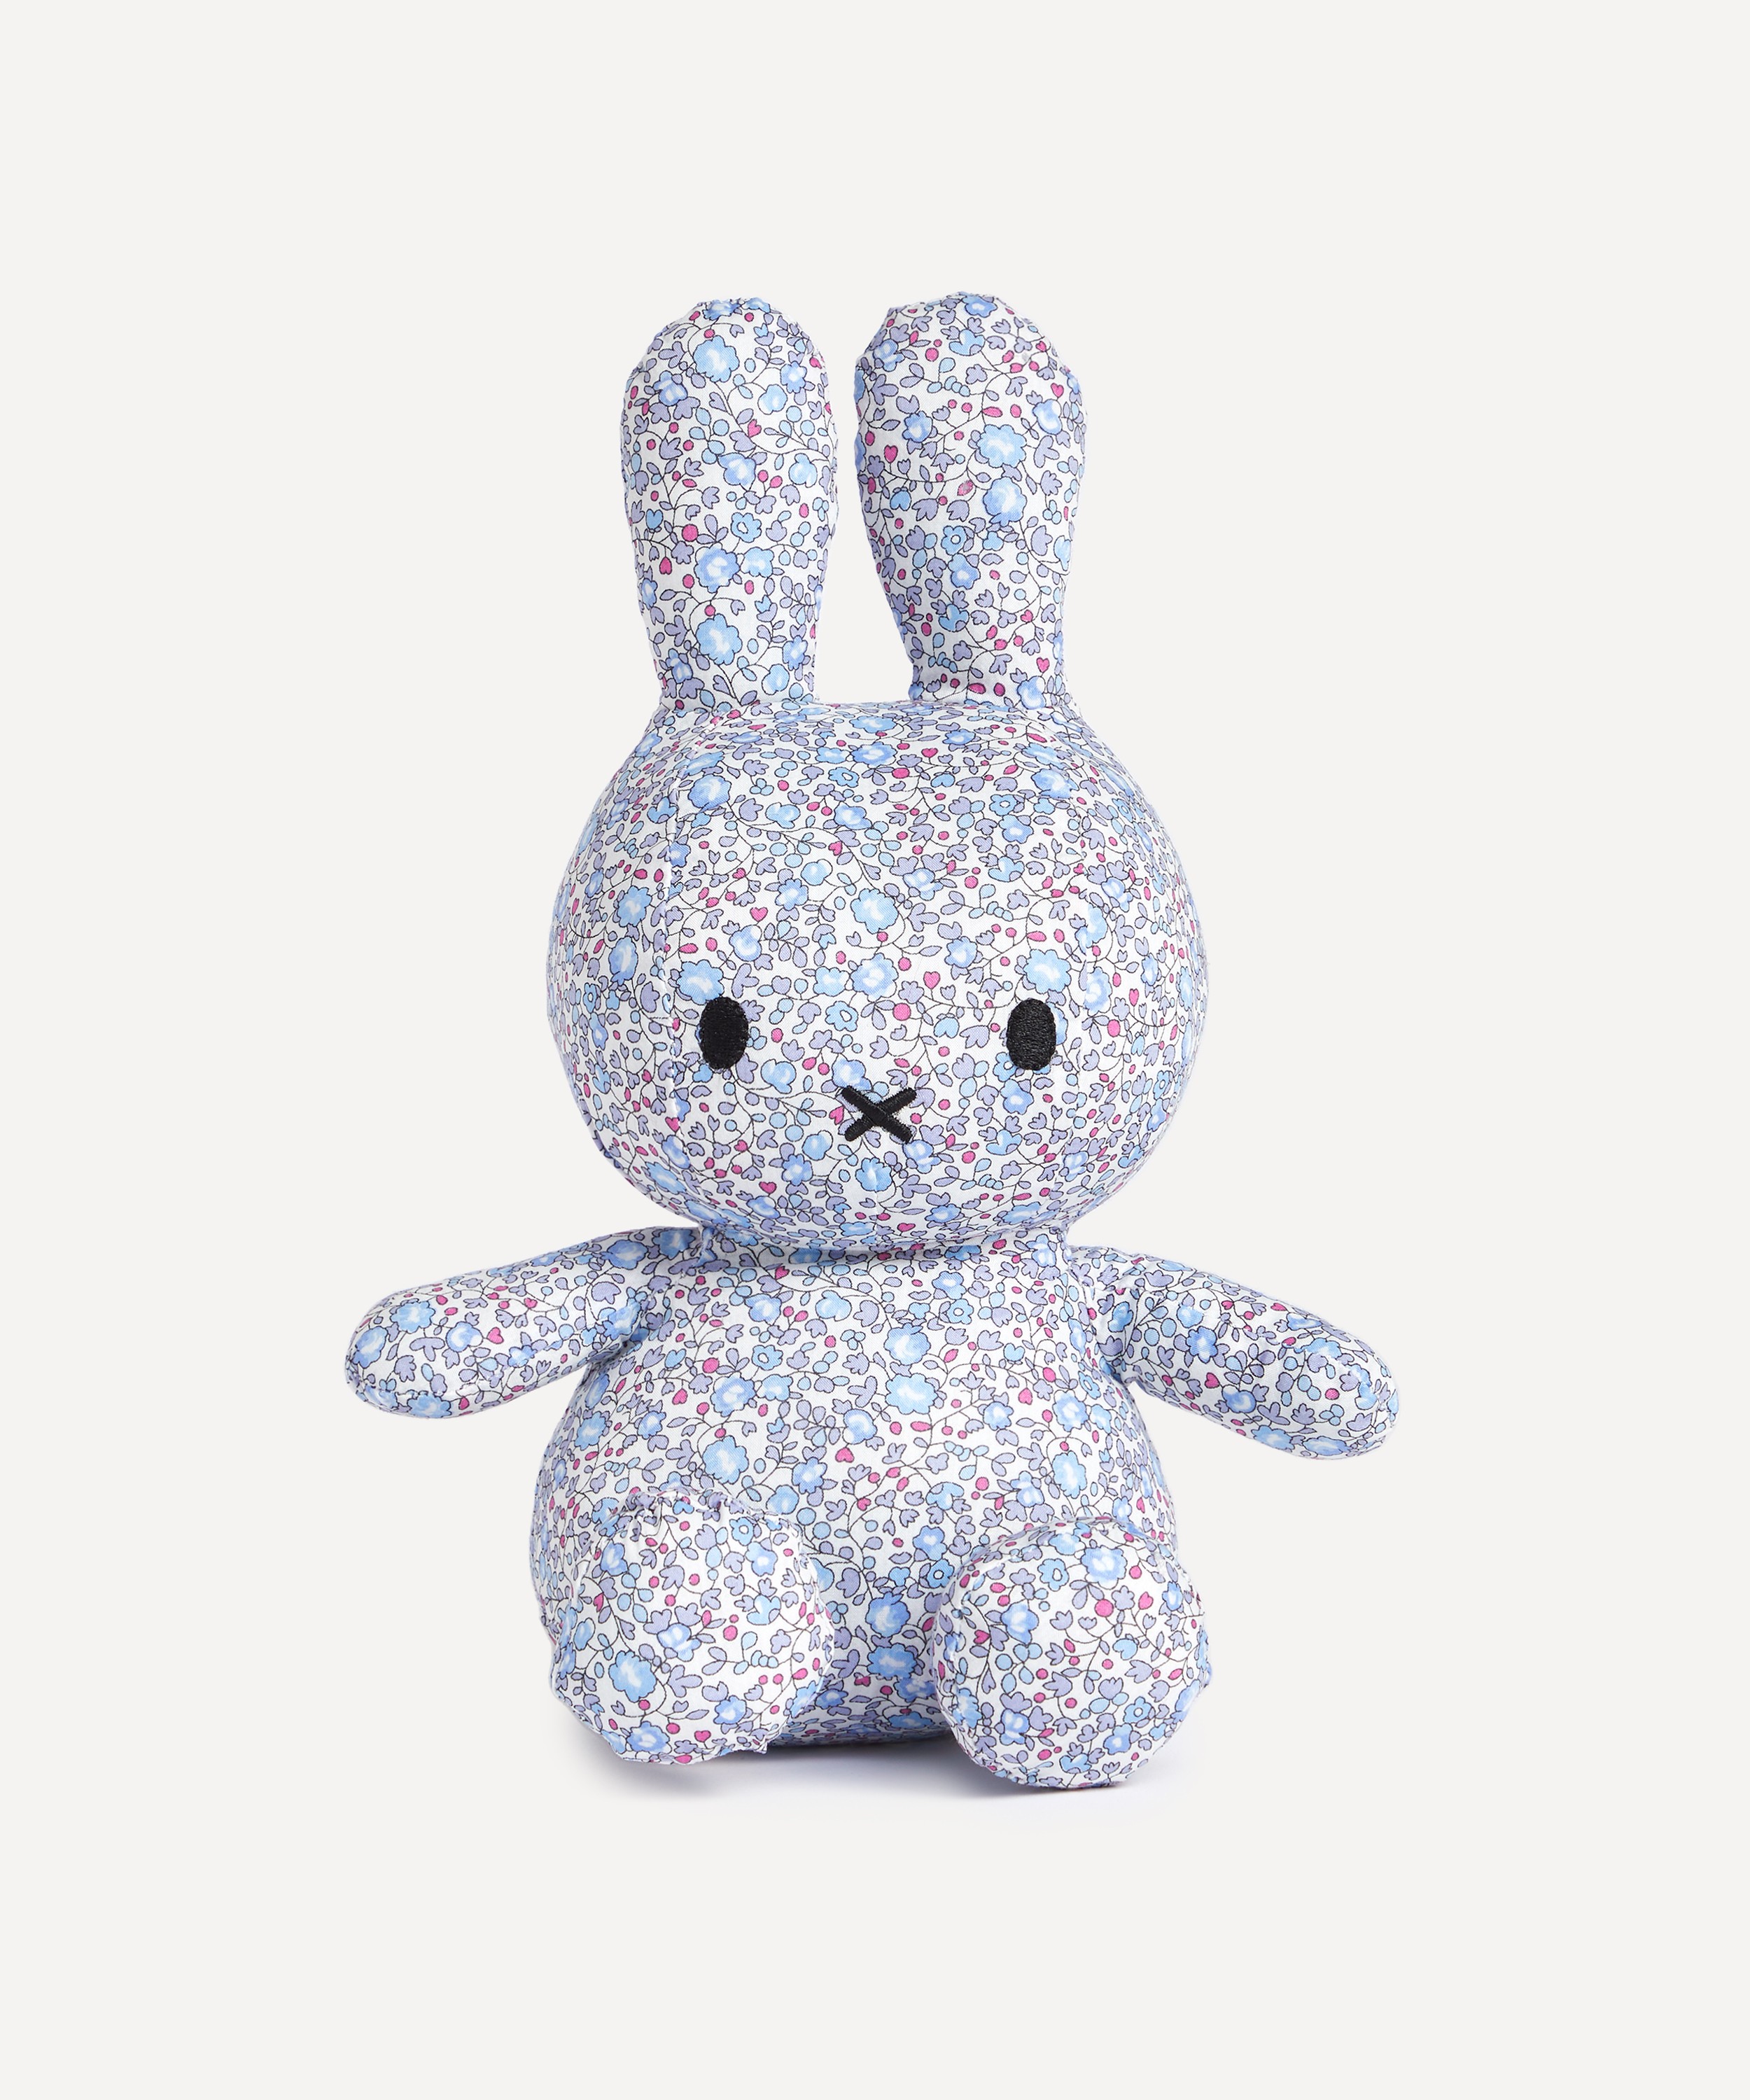 Miffy - Eloise Print Miffy Soft Toy image number 2